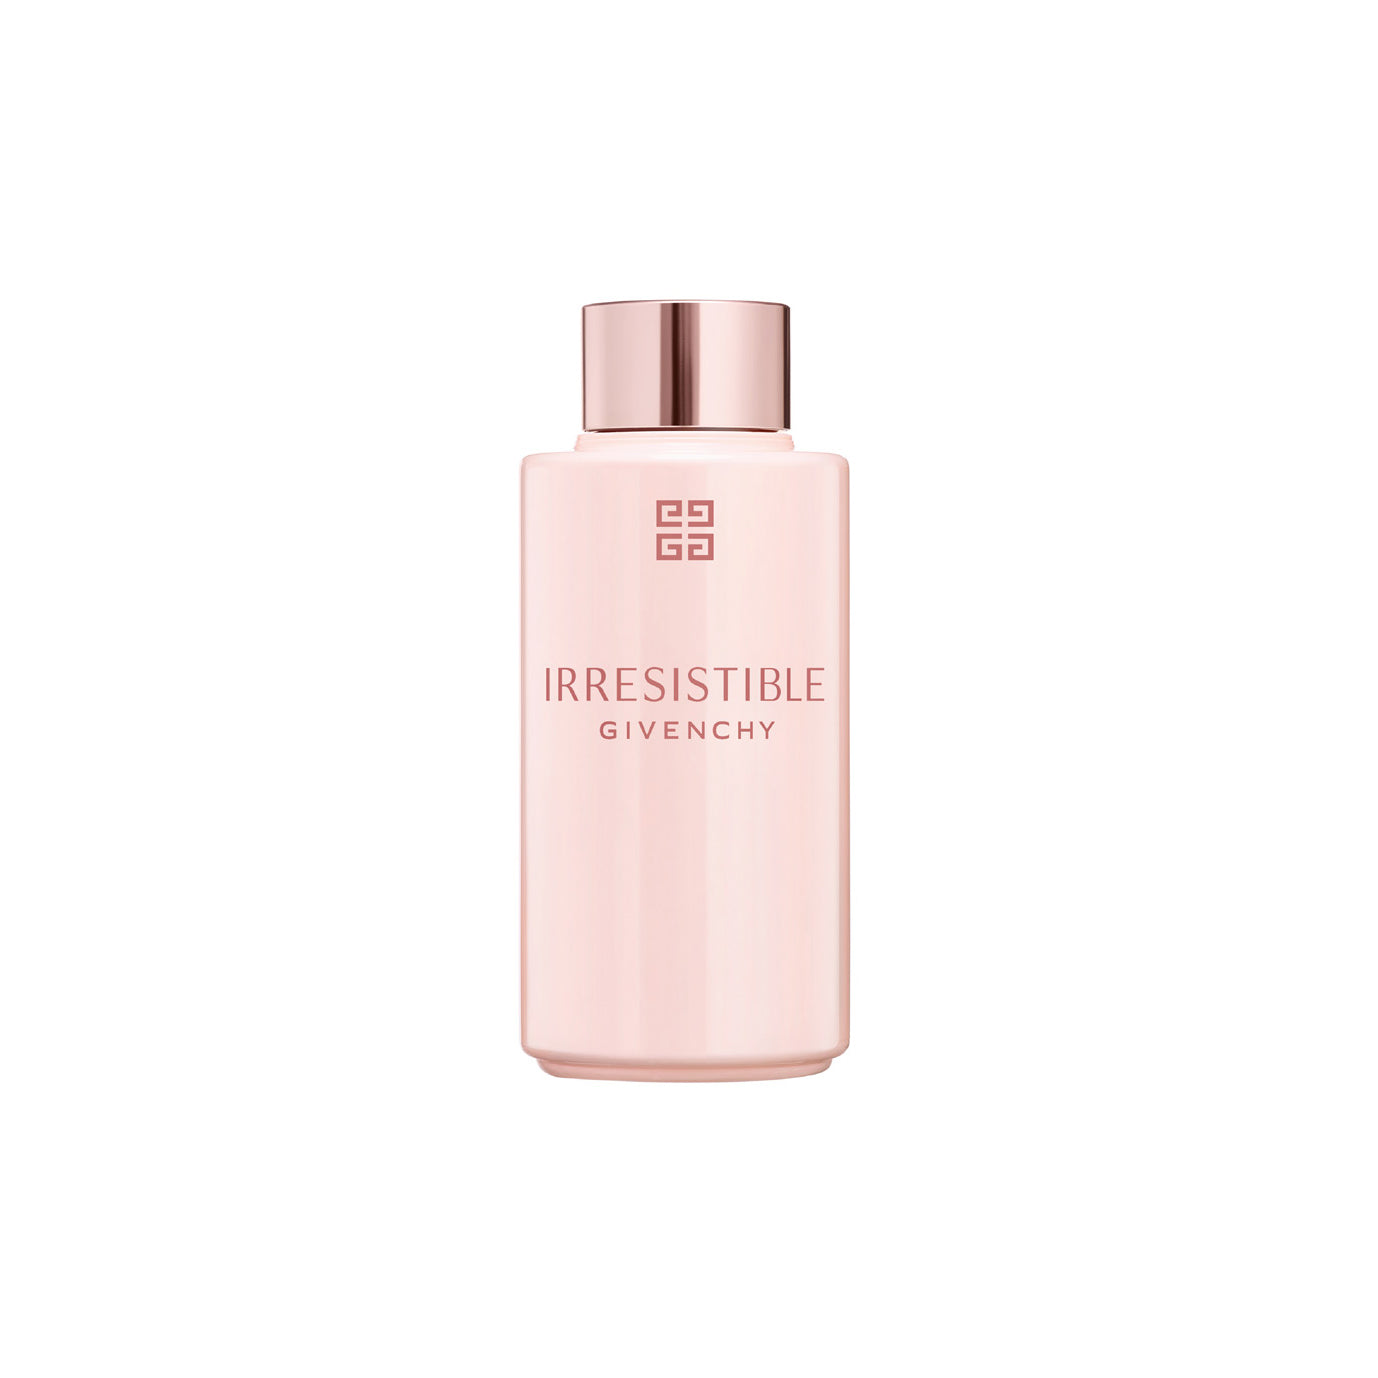 Irresistible De Givenchy Shower oil 200ml